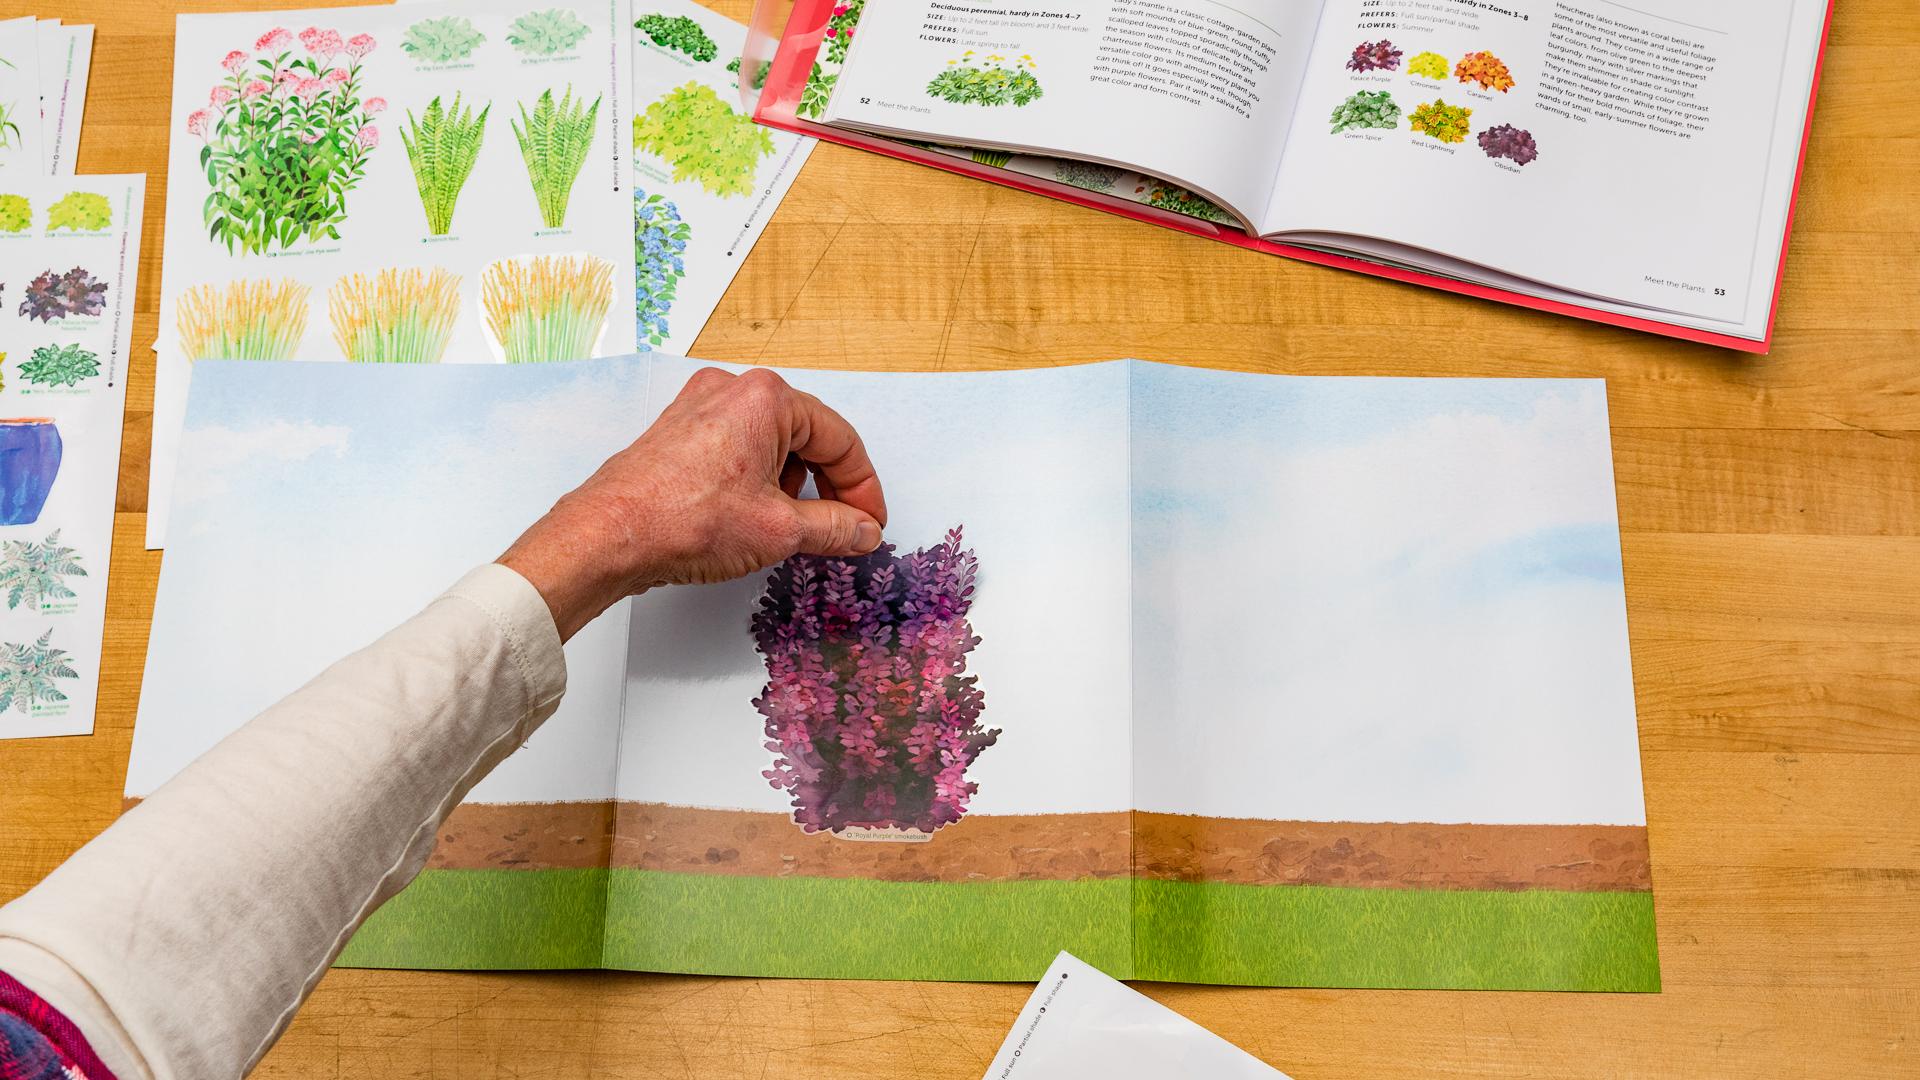  Use the stickers and the fold-out design board to visualize the perfect plant combinations for your yard. 